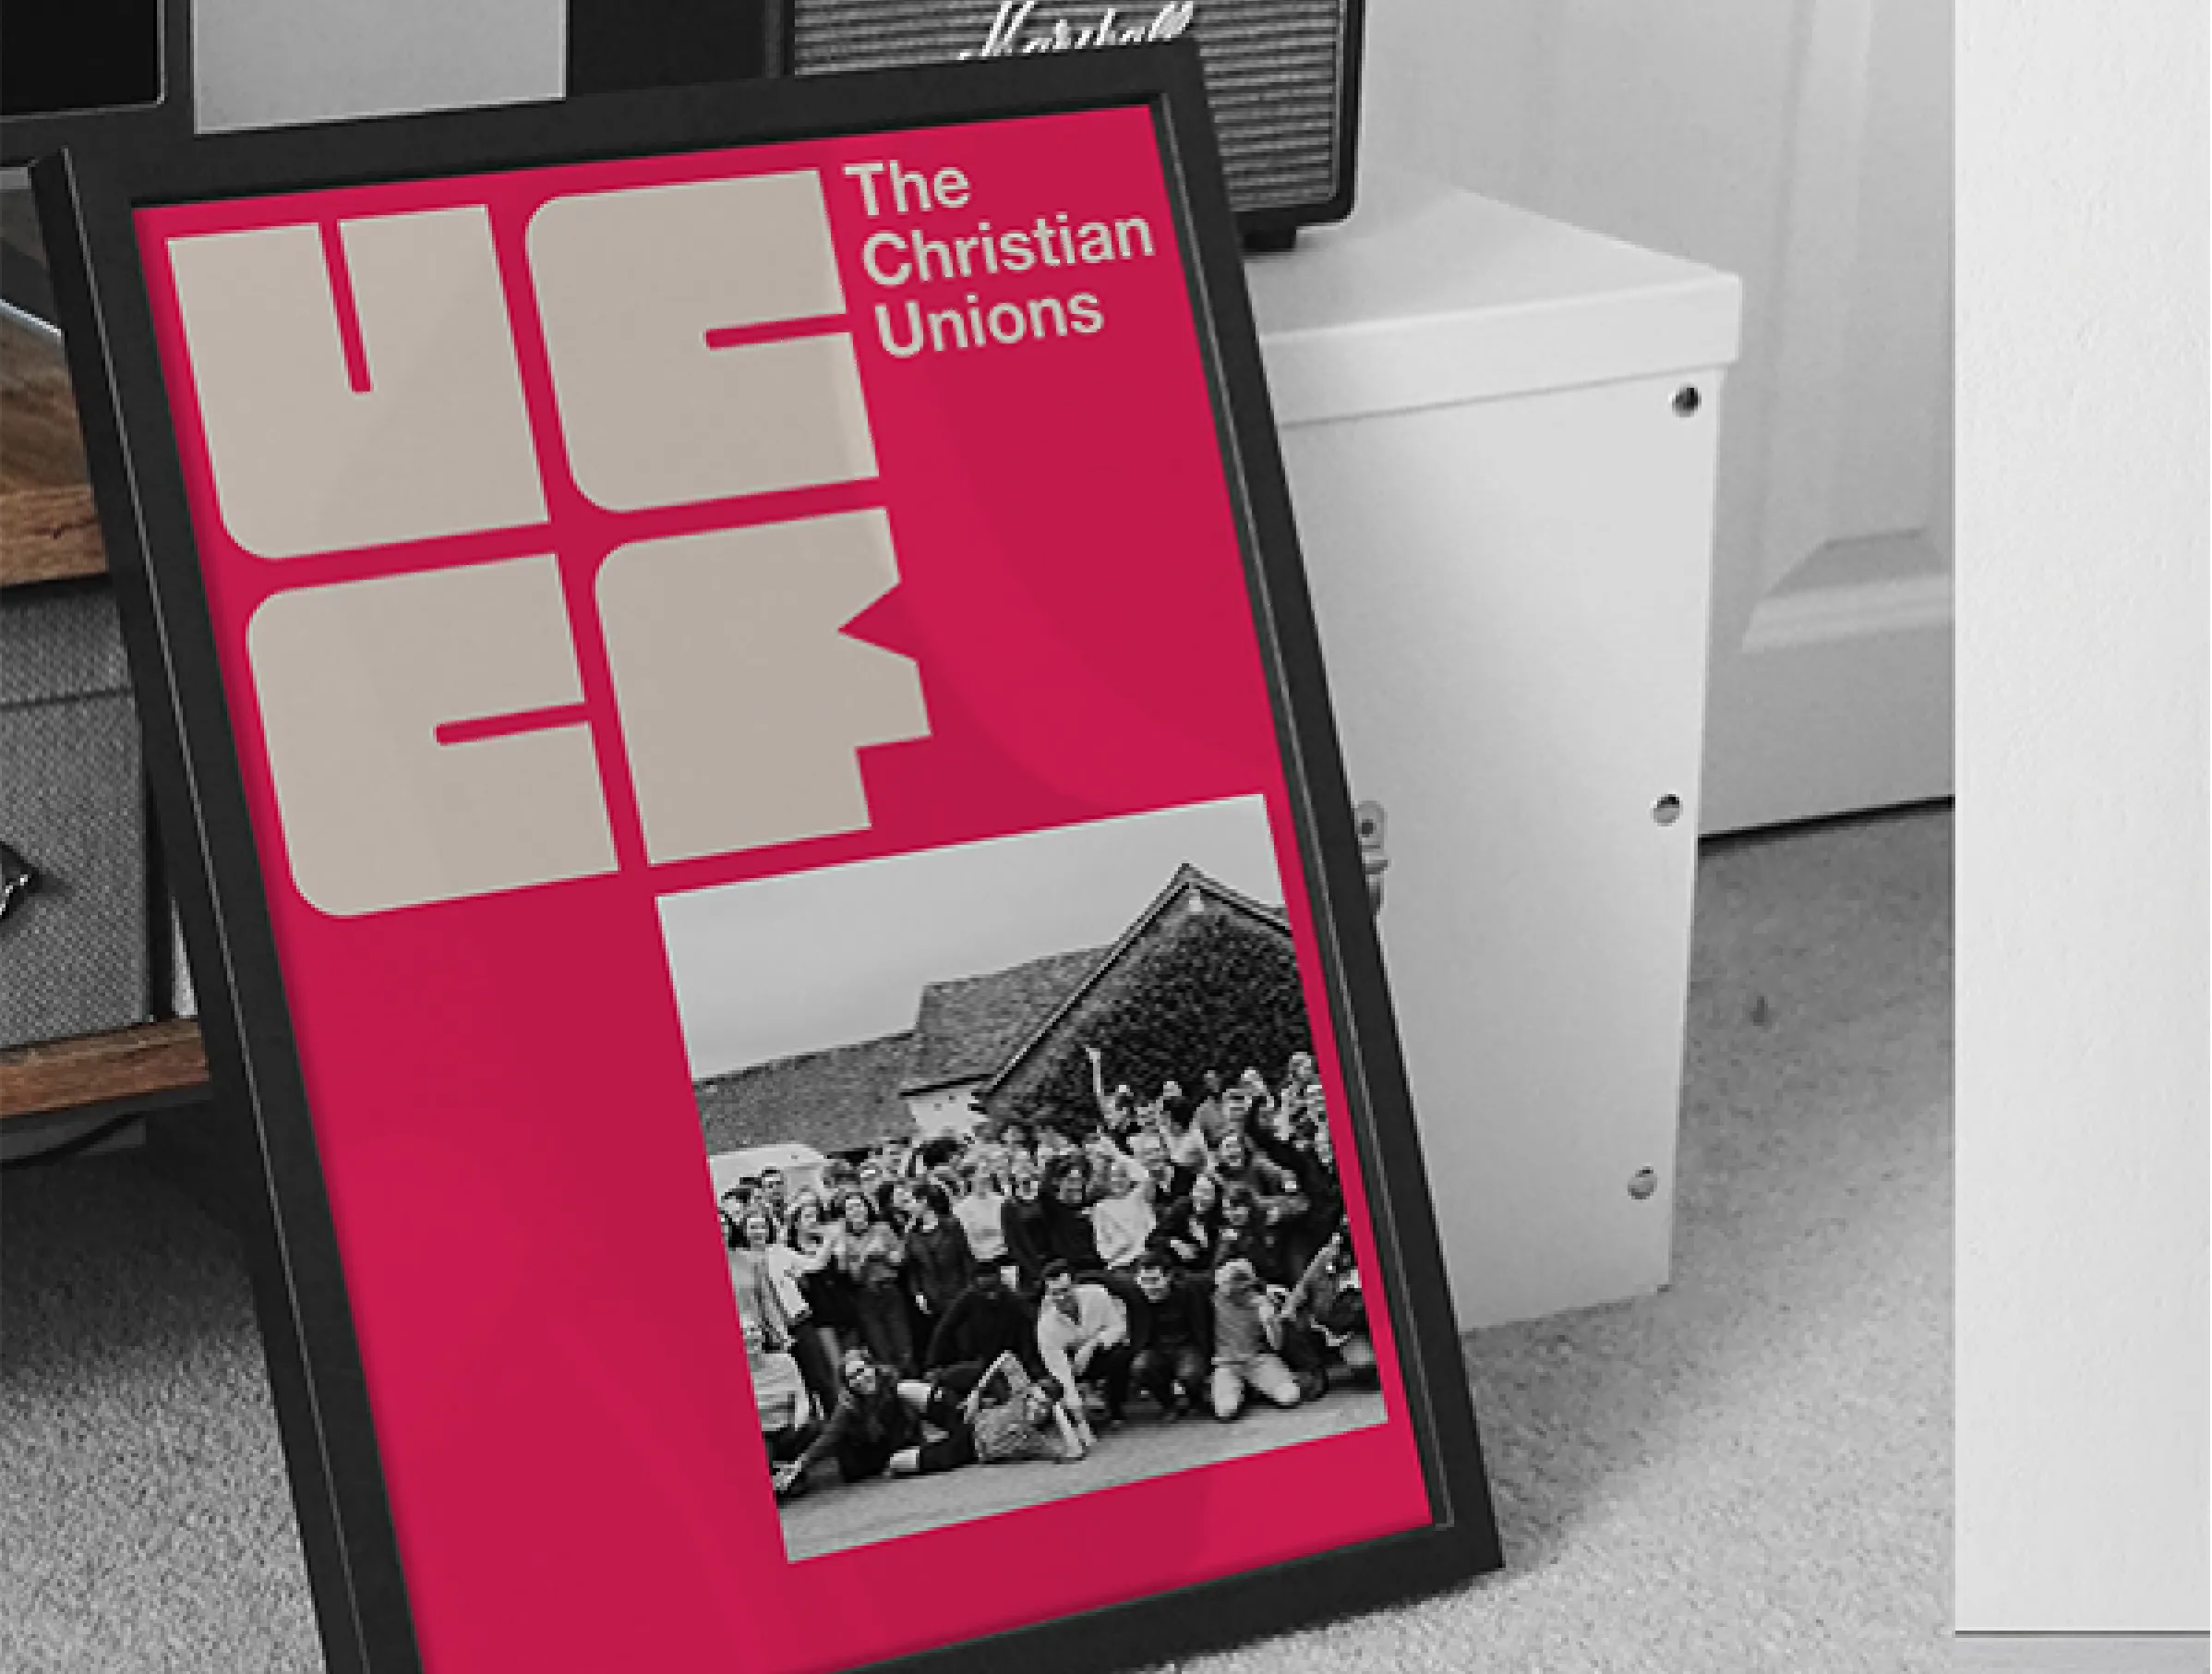 UCCF poster in a frame